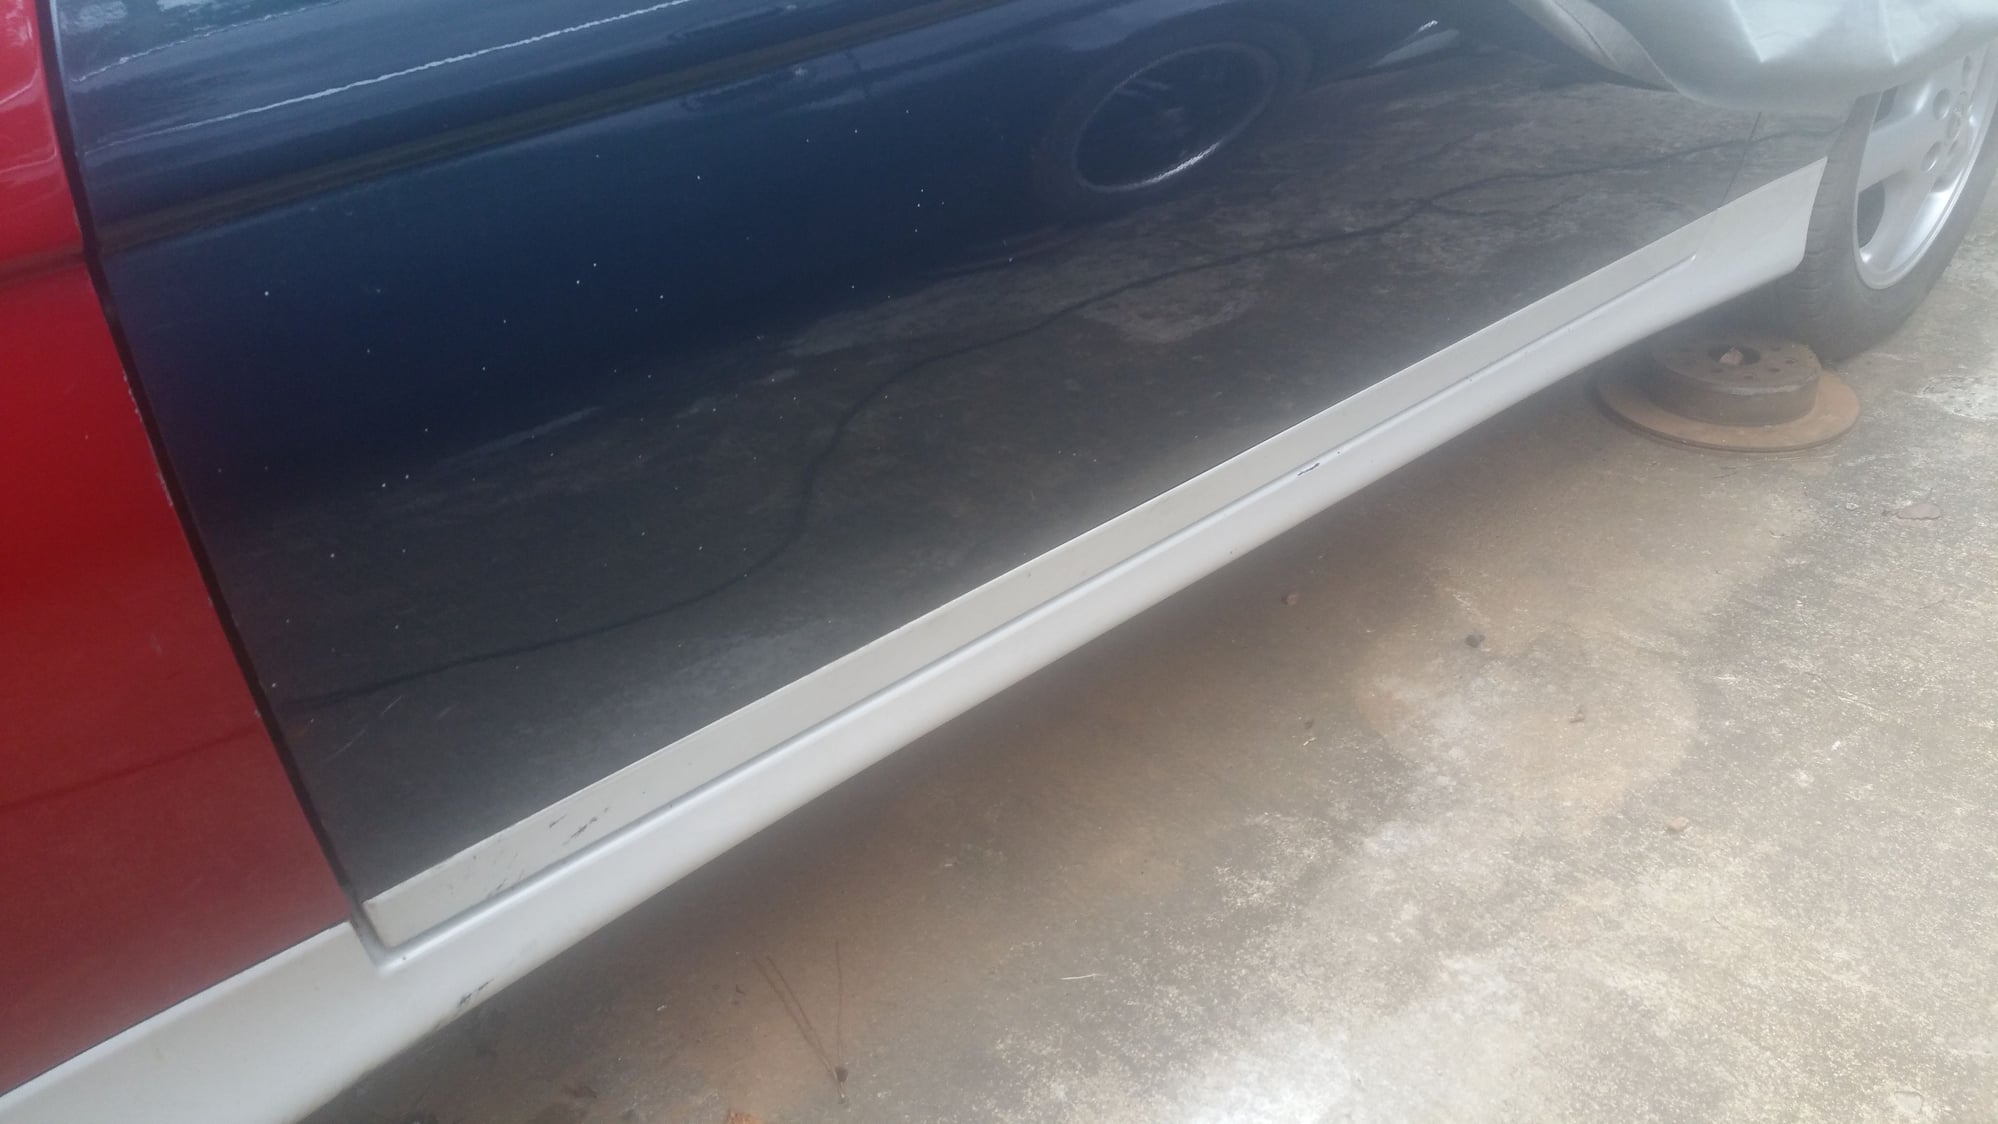 Exterior Body Parts - 1997 SC300 SC400  Lower Door moldings , bumper grille and glass high beams - Used - 1992 to 2002 Lexus SC300 - Duluth, GA 30096, United States